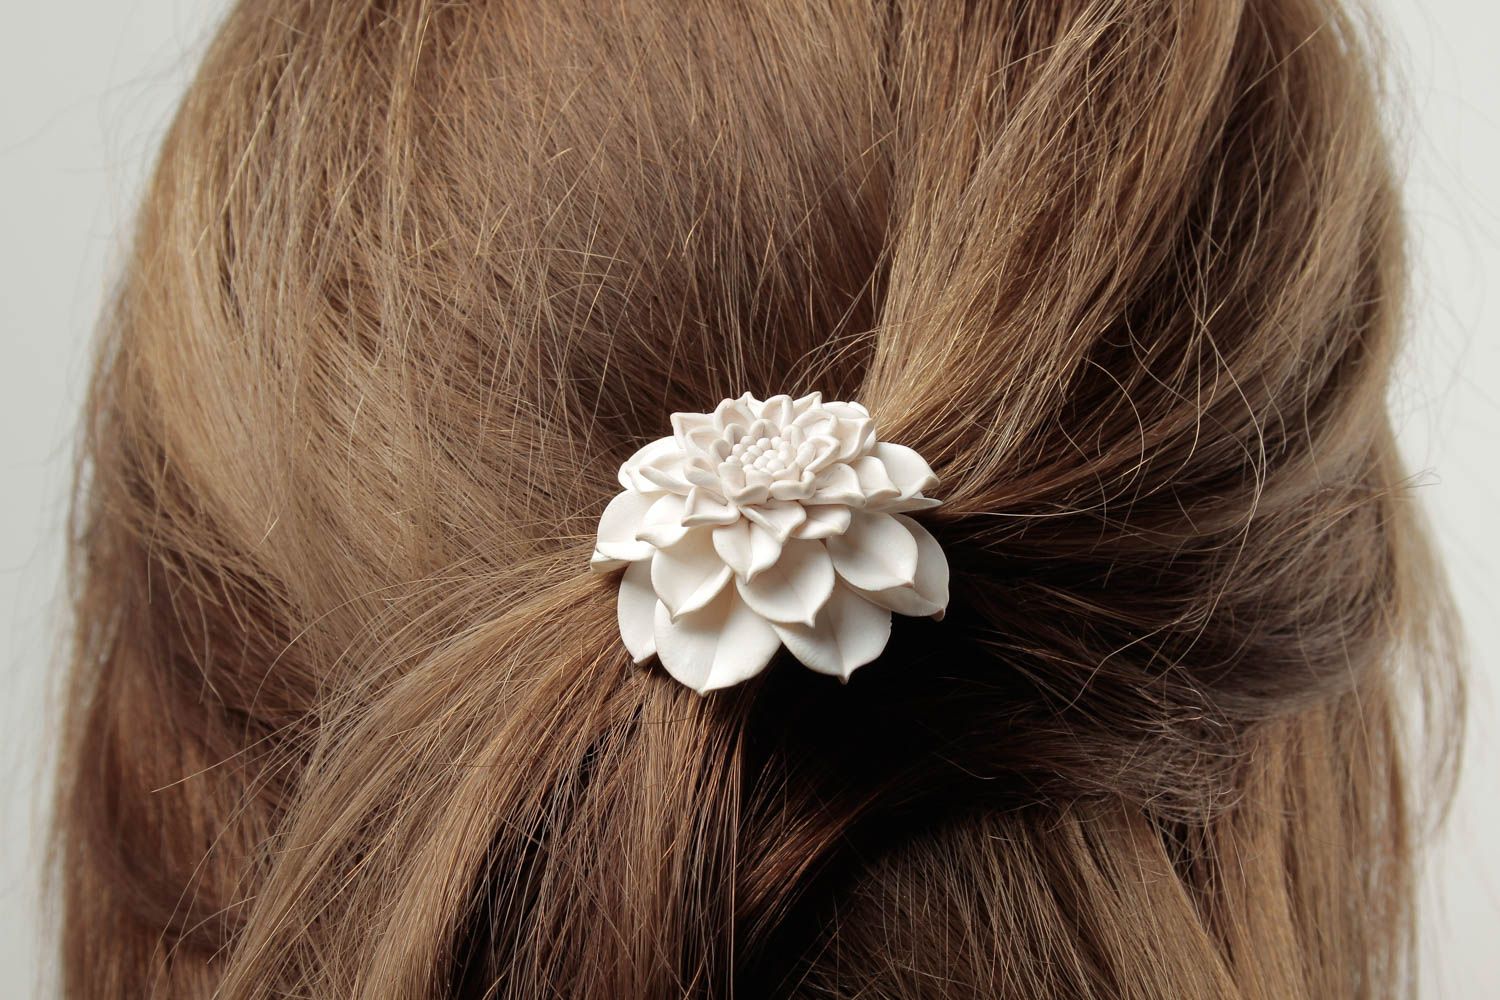 Stylish handmade hair pin plastic flower hairpin polymer clay ideas gift for her photo 1